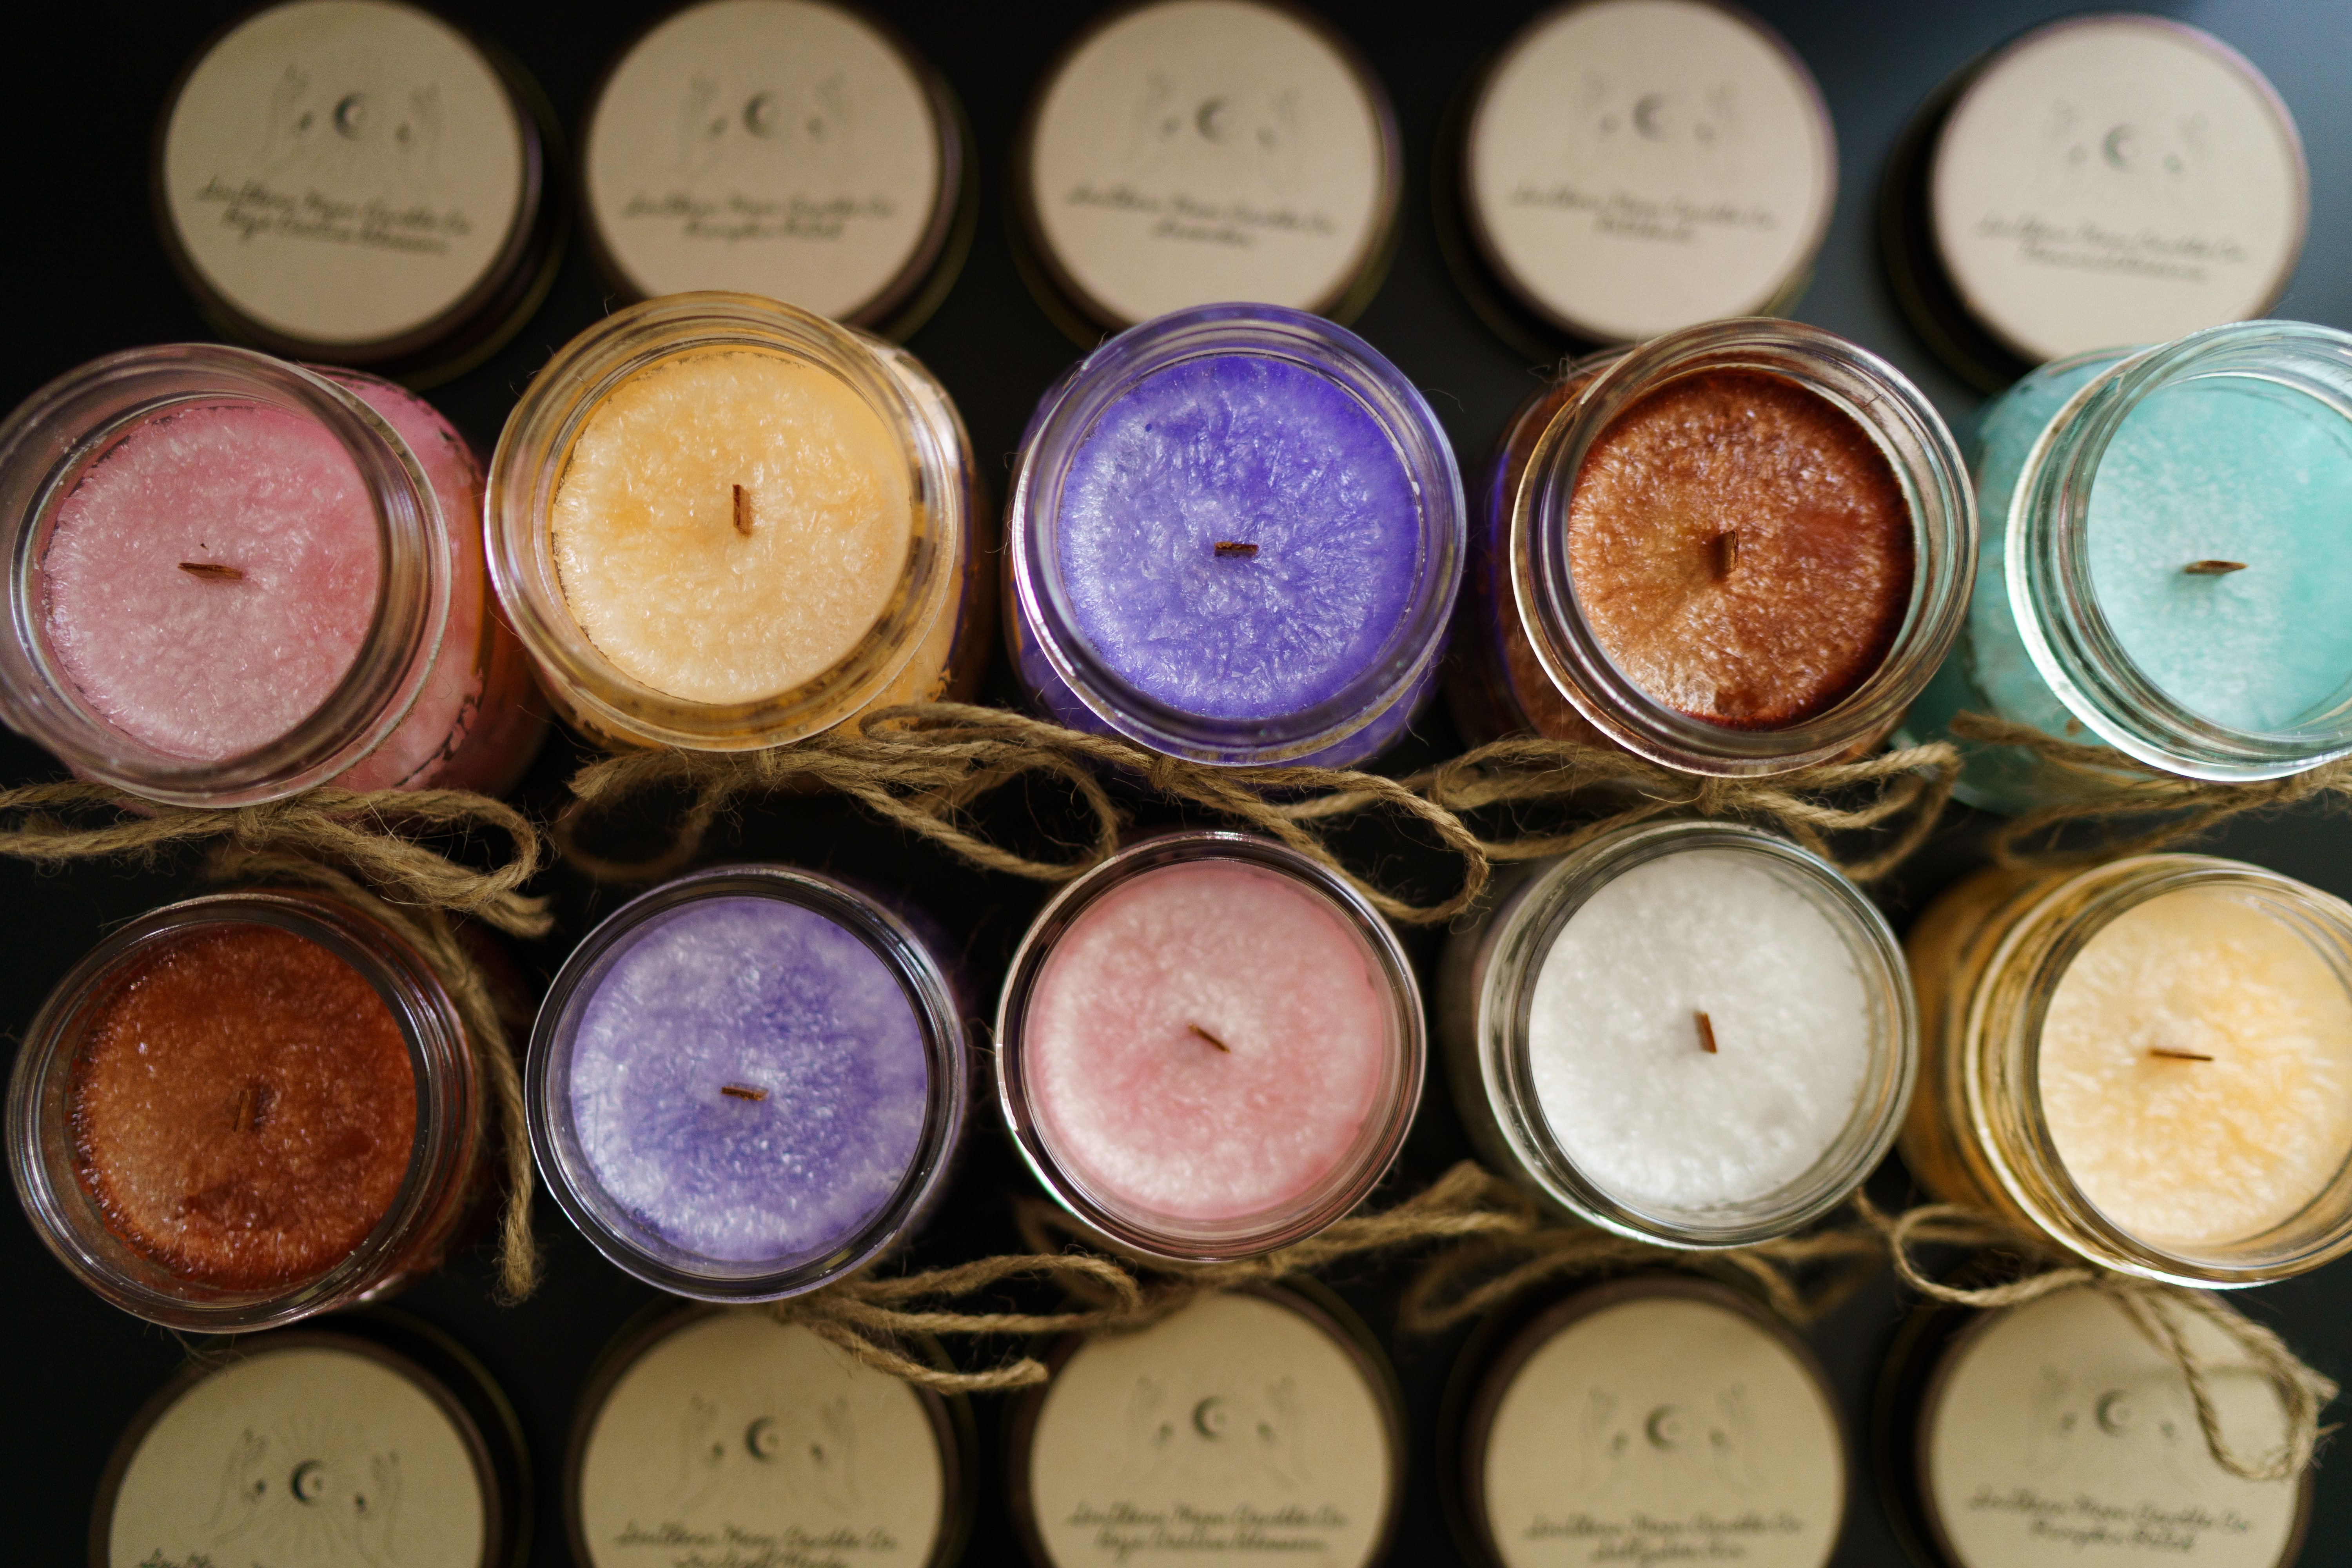 Best Wax For Candle Making ( + Pros & Cons of Each Type)